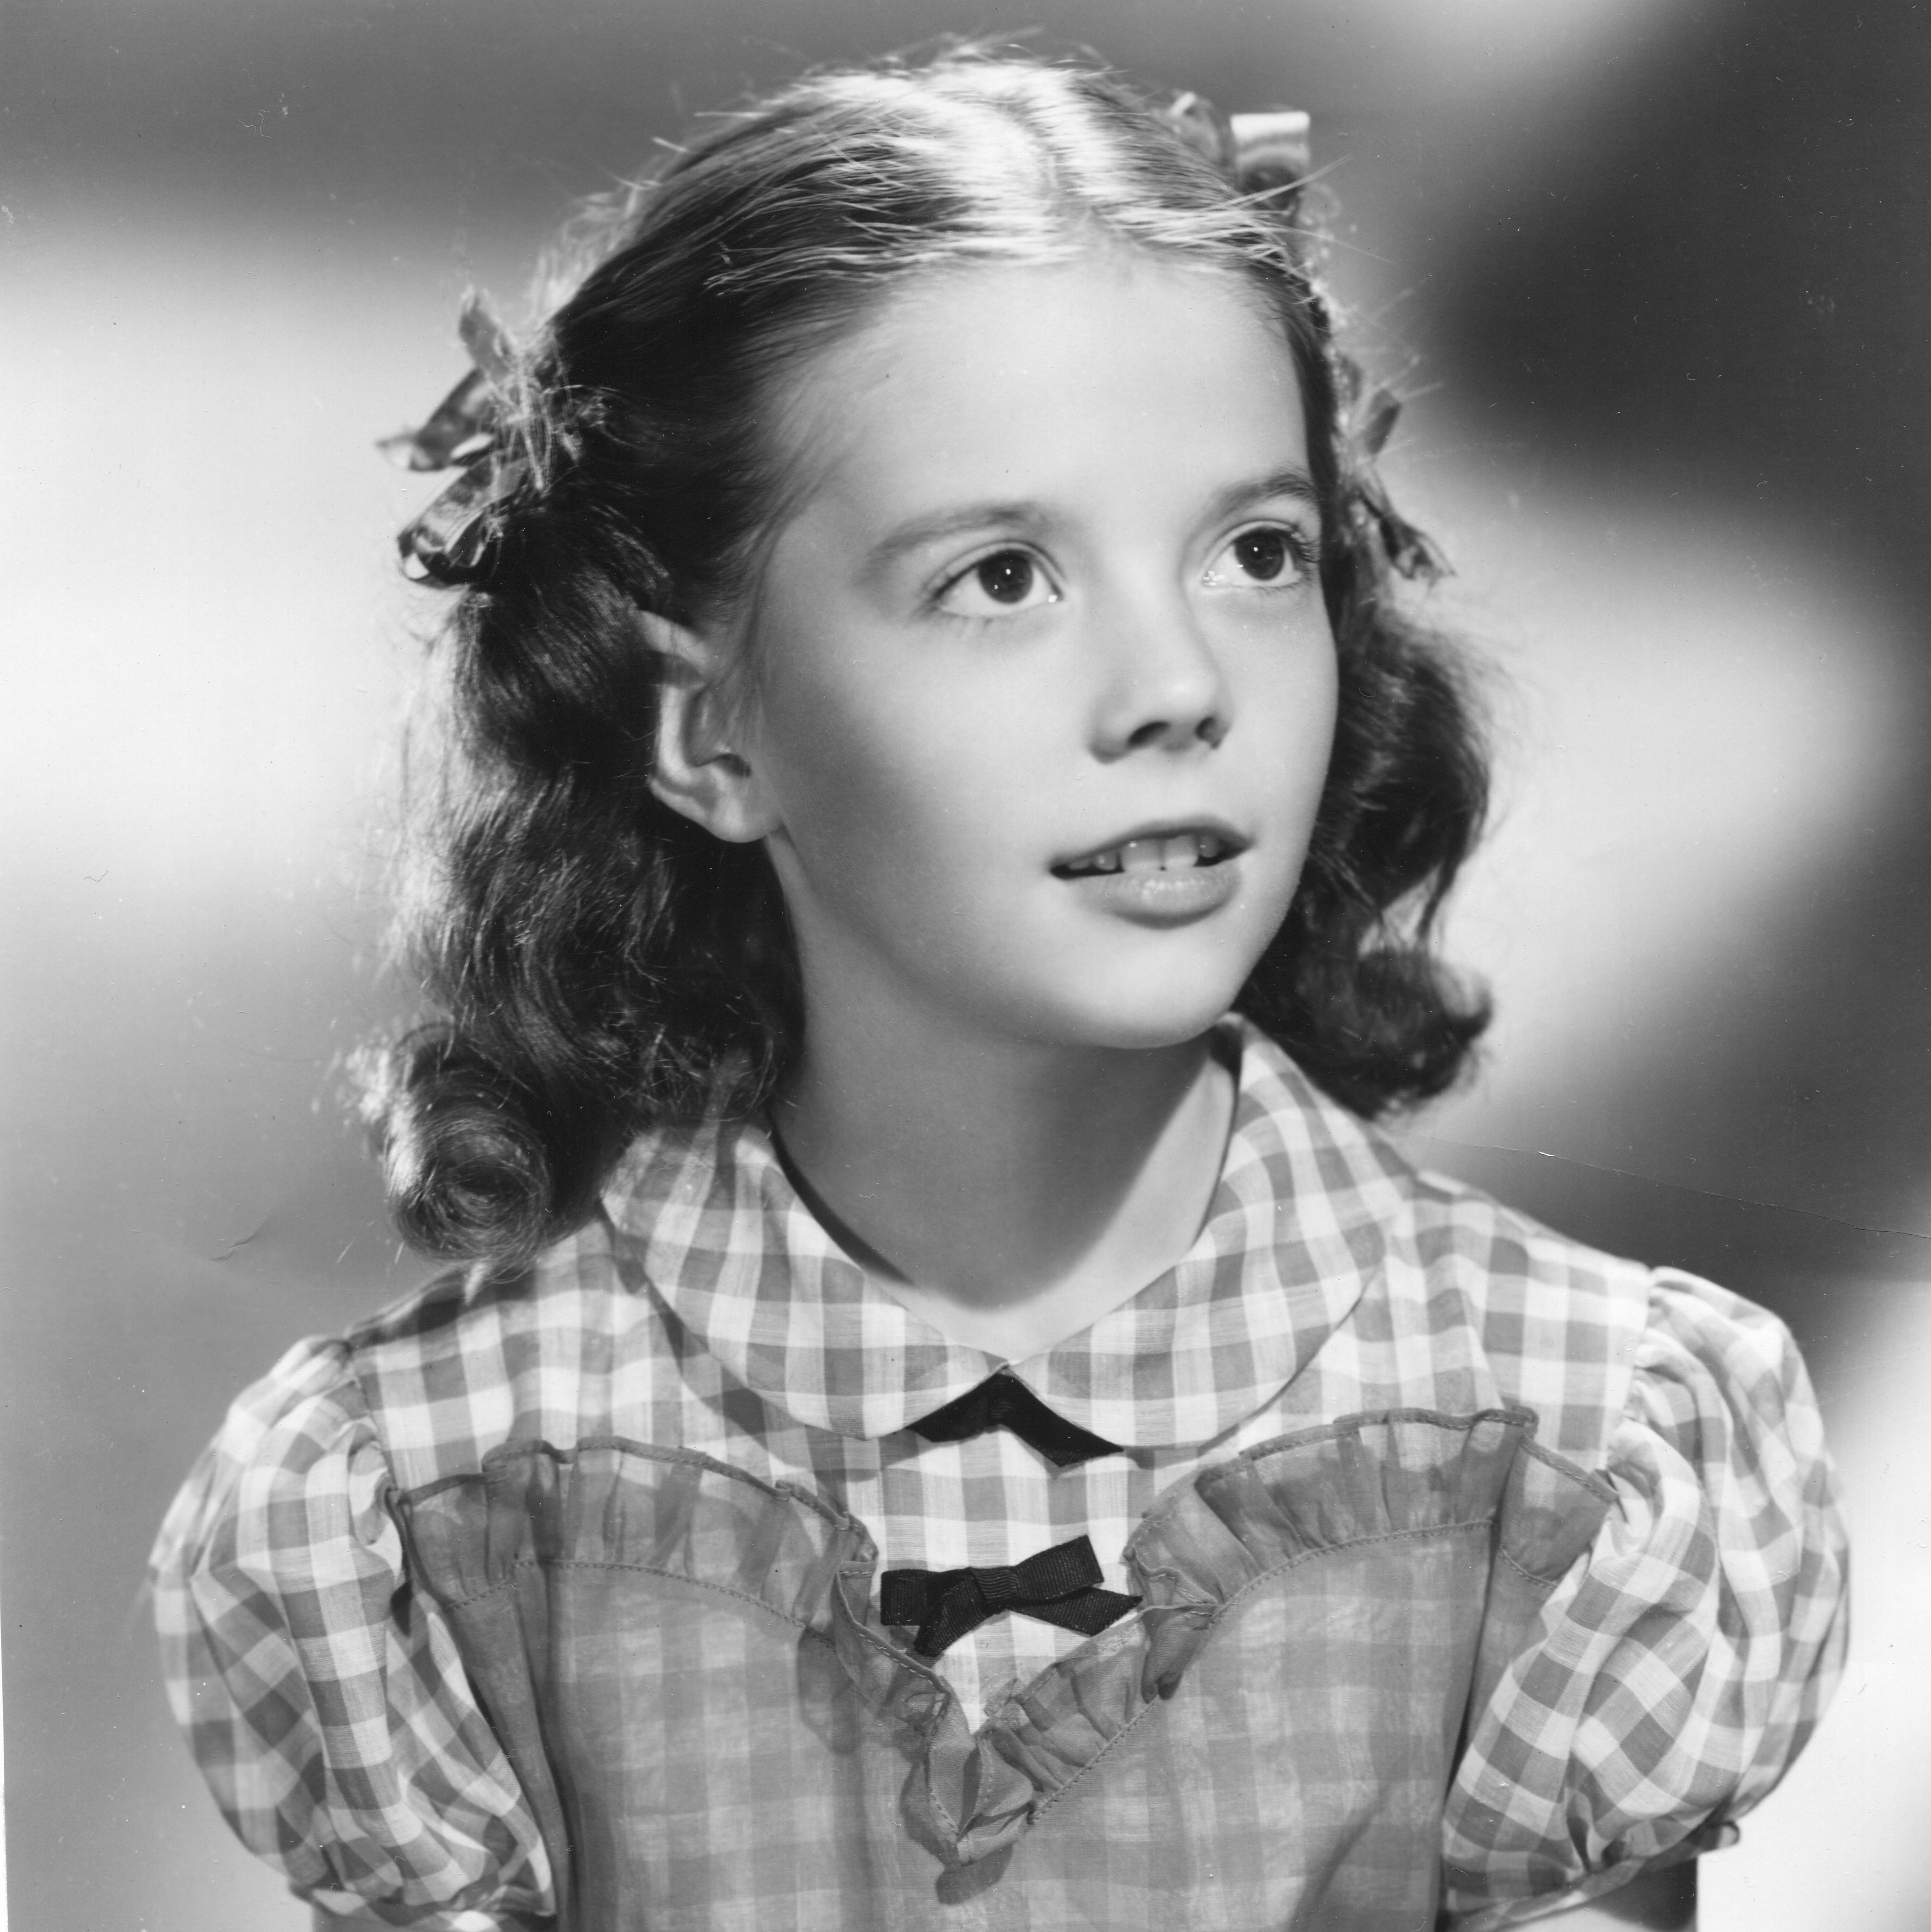 Portrait of 10-year-old Natalie Wood, 1949